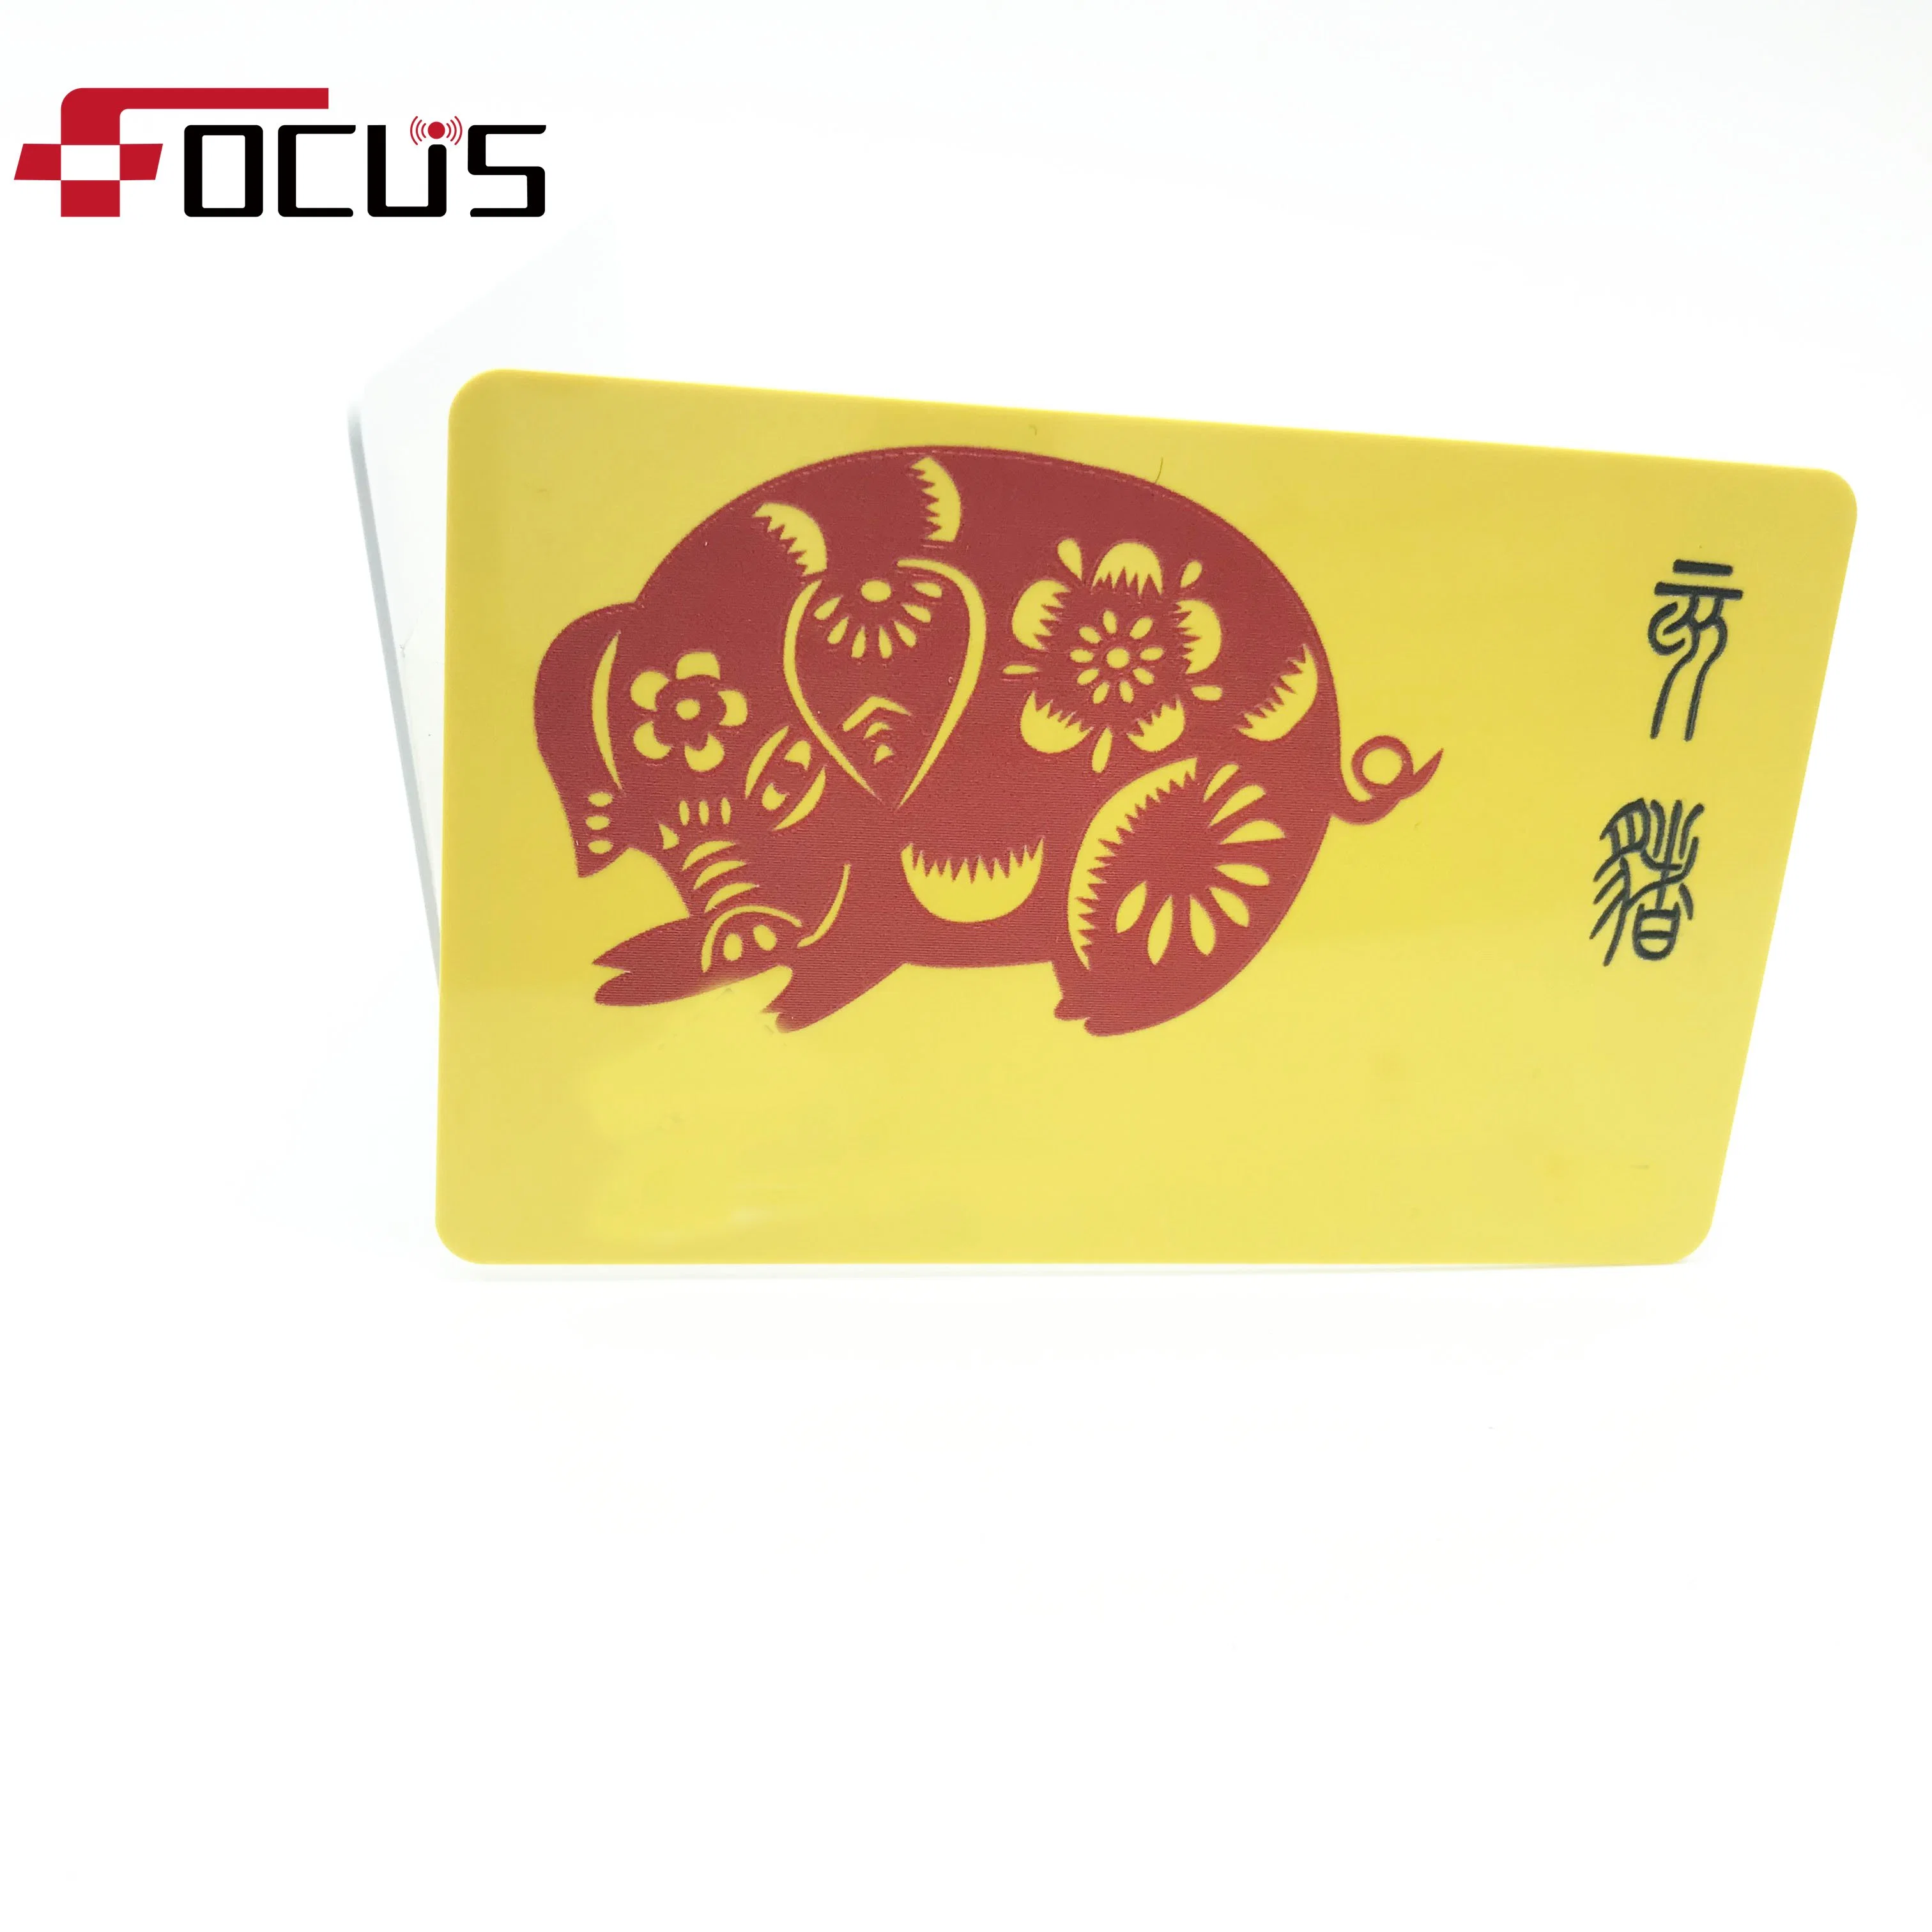 High Quality ISO Contact Card PVC Material Bank Card